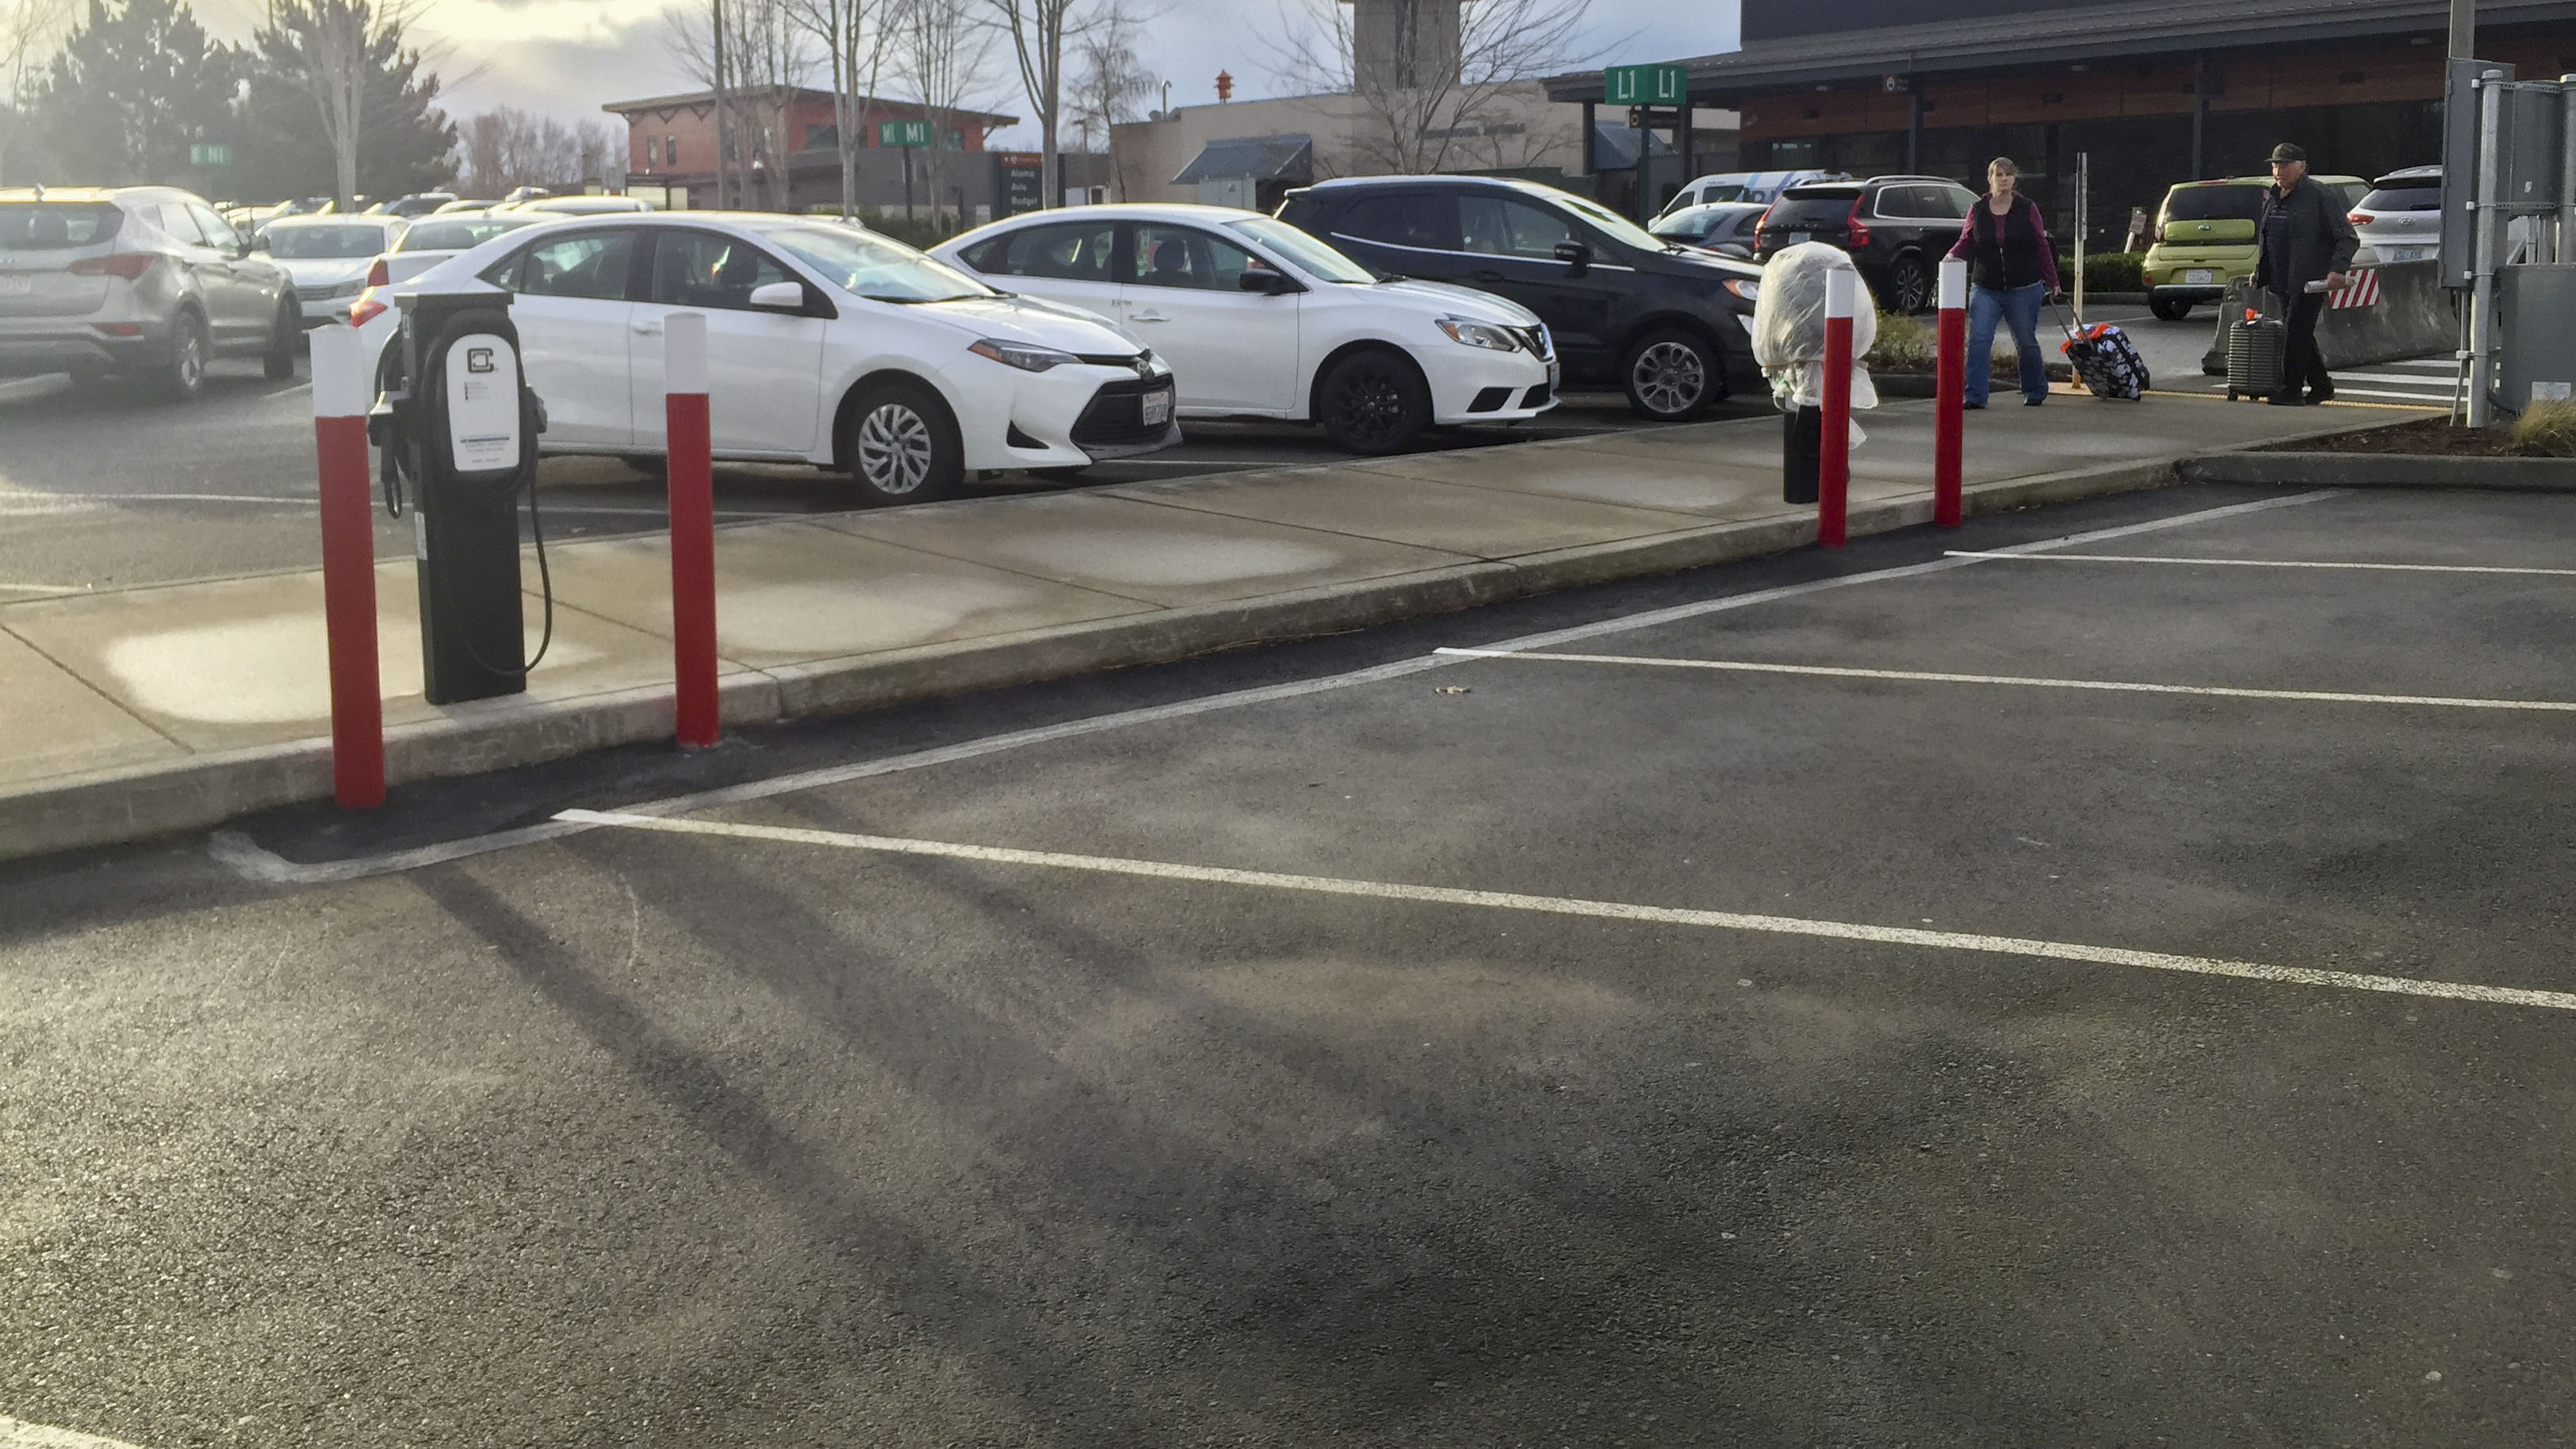 Bellingham Airport Installs Electric Vehicle Charging Stations for Travelers, Employees